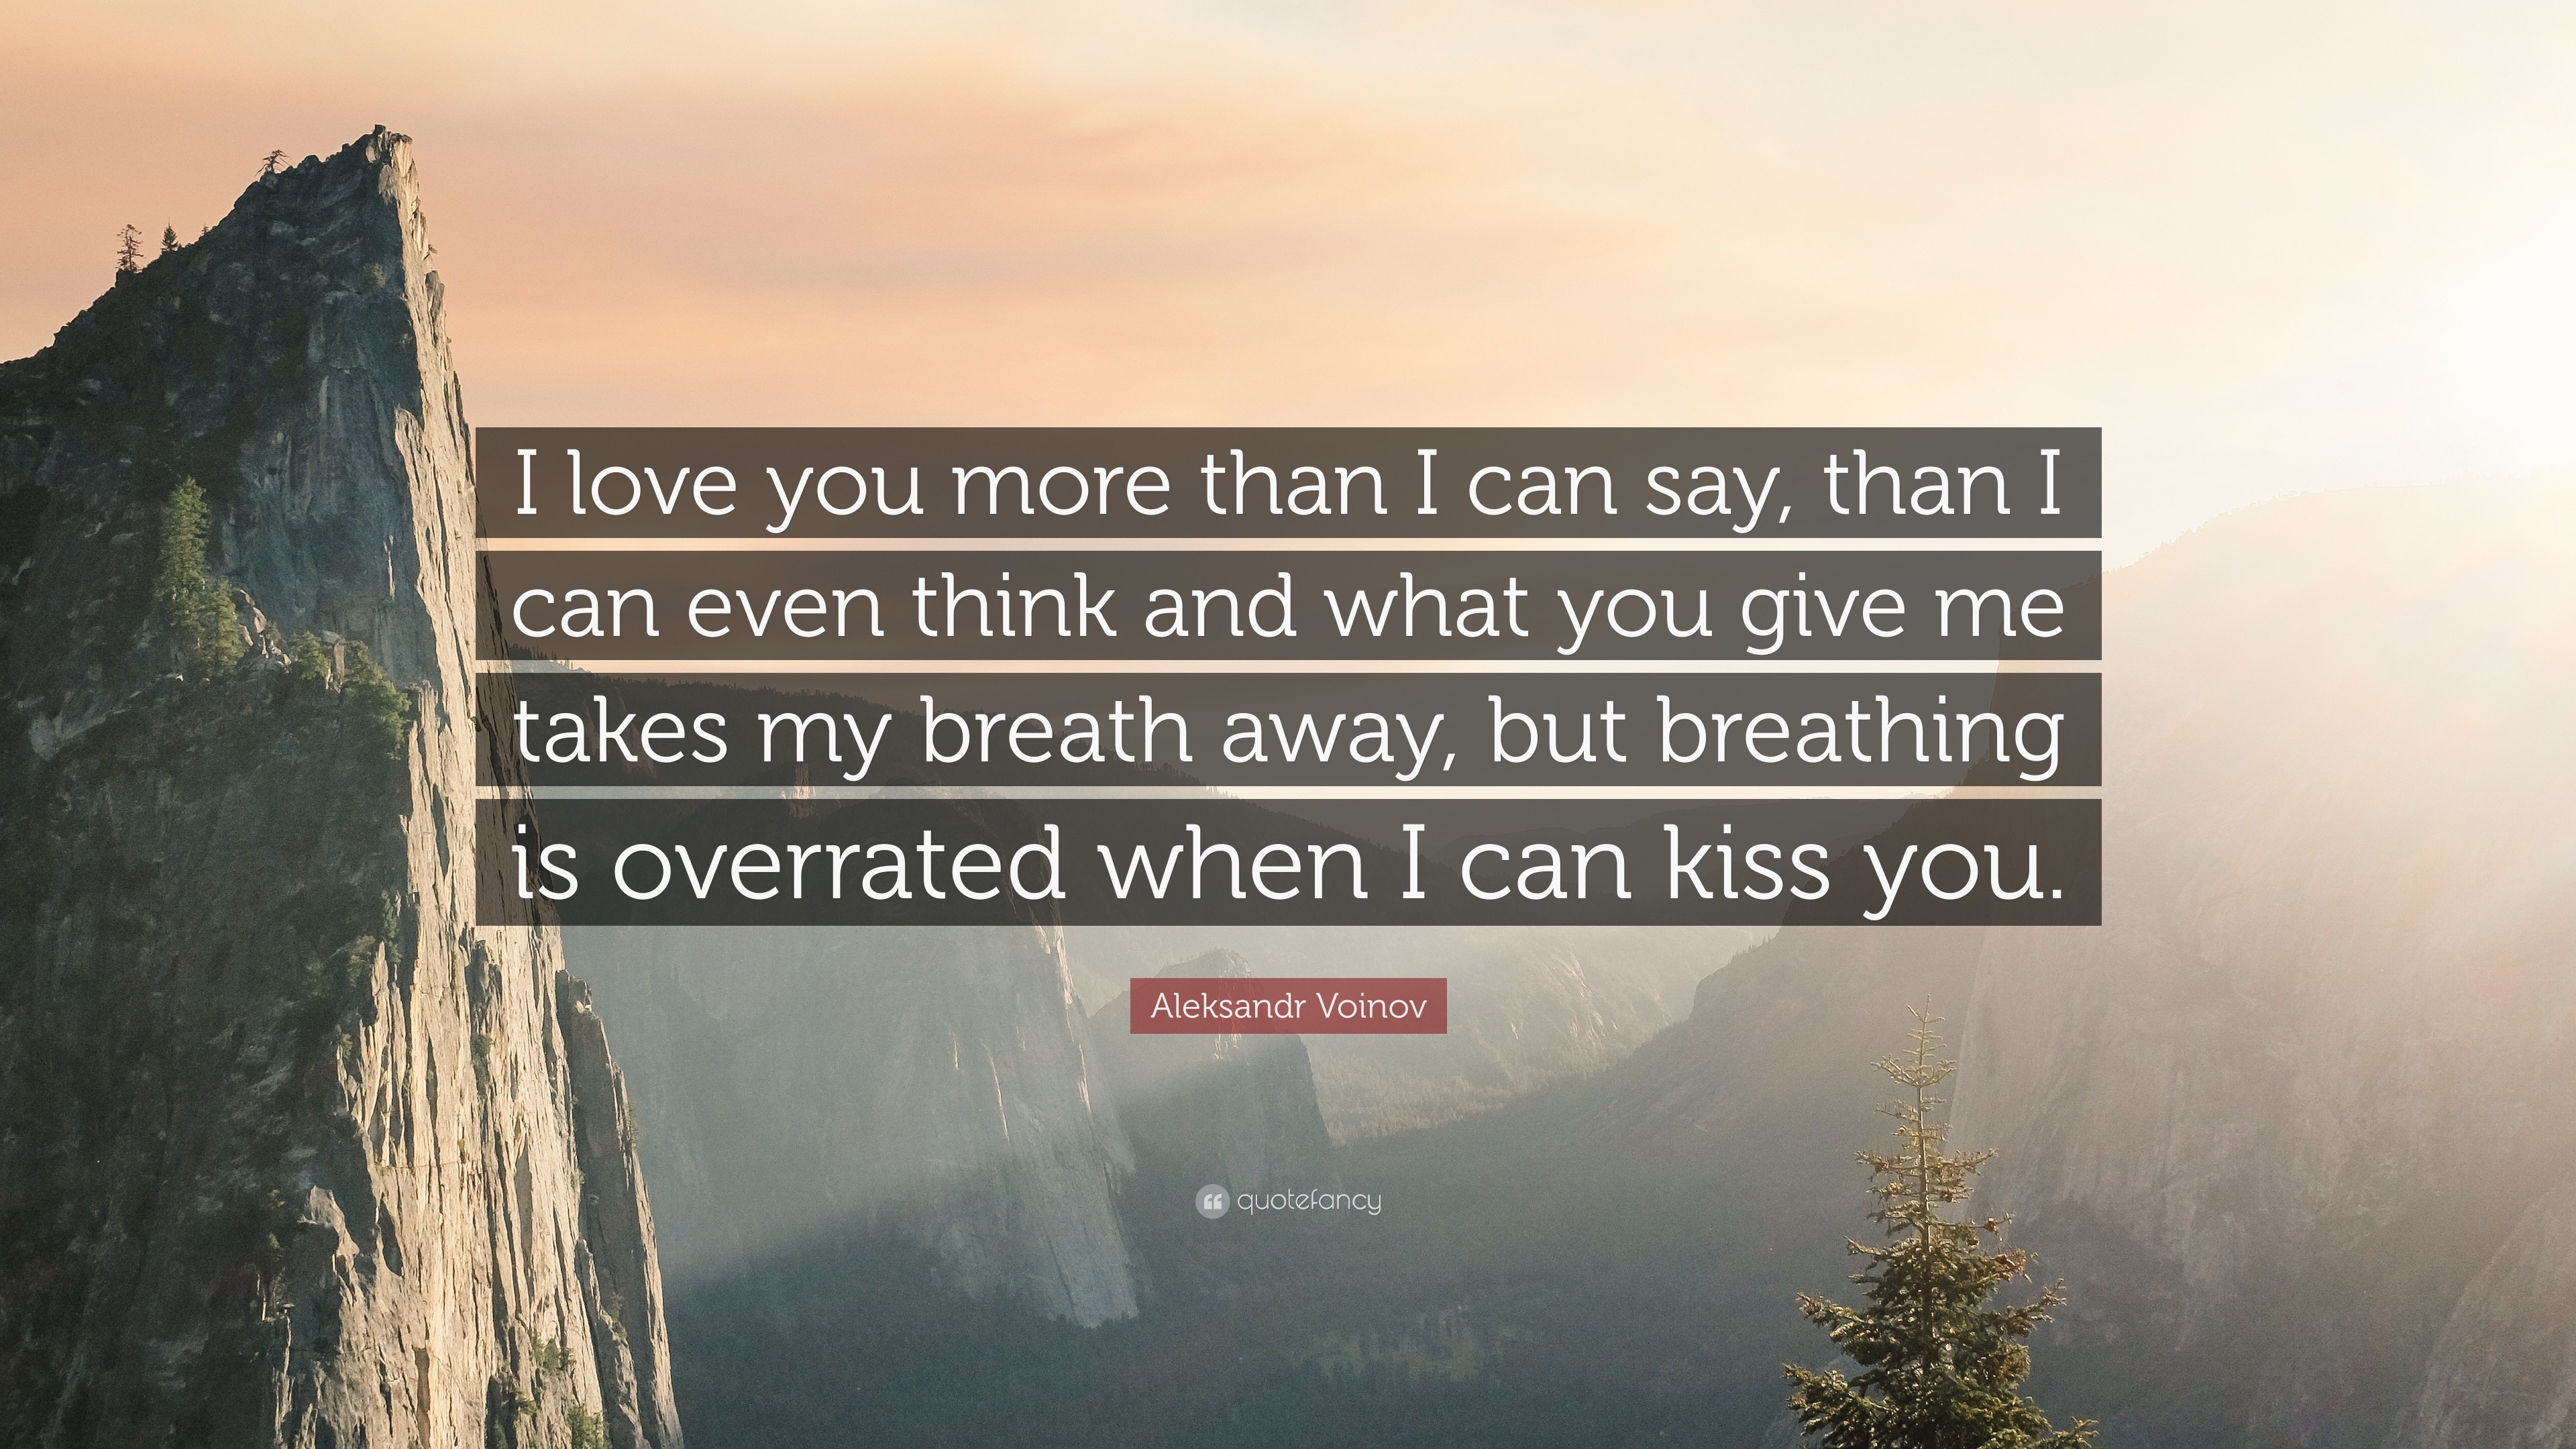 Aleksandr Voinov Quote I Love You More Than I Can Say Than I Can Even Think And What You Give Me Takes My Breath Away But Breathing Is Overra